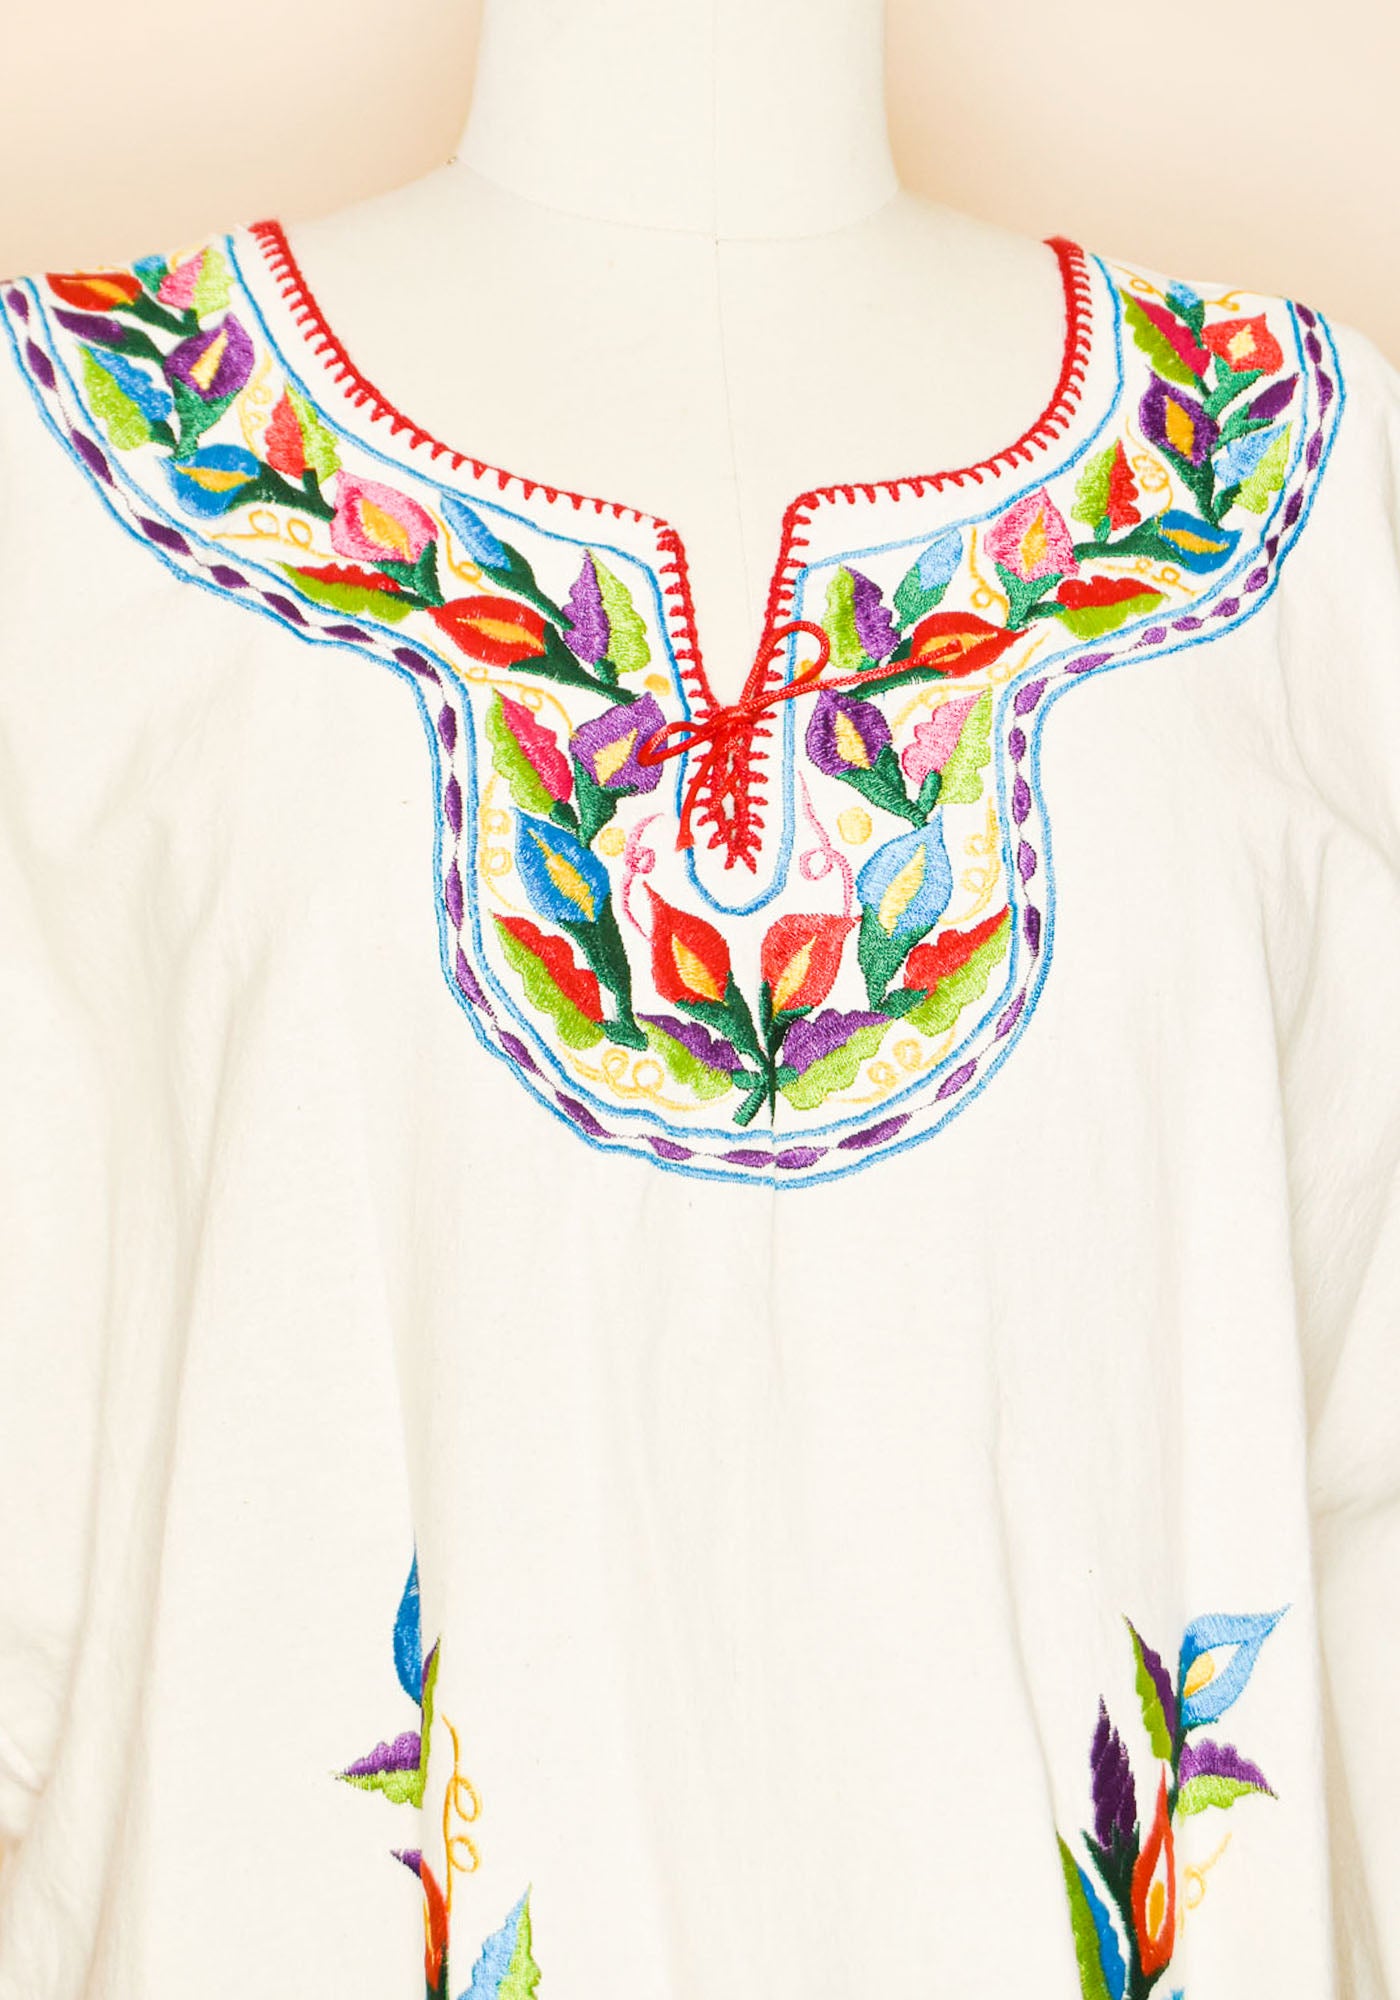 Mexican Cotton Embroidered Tunic Blouse-Ivory-Embroidery Detail Shot